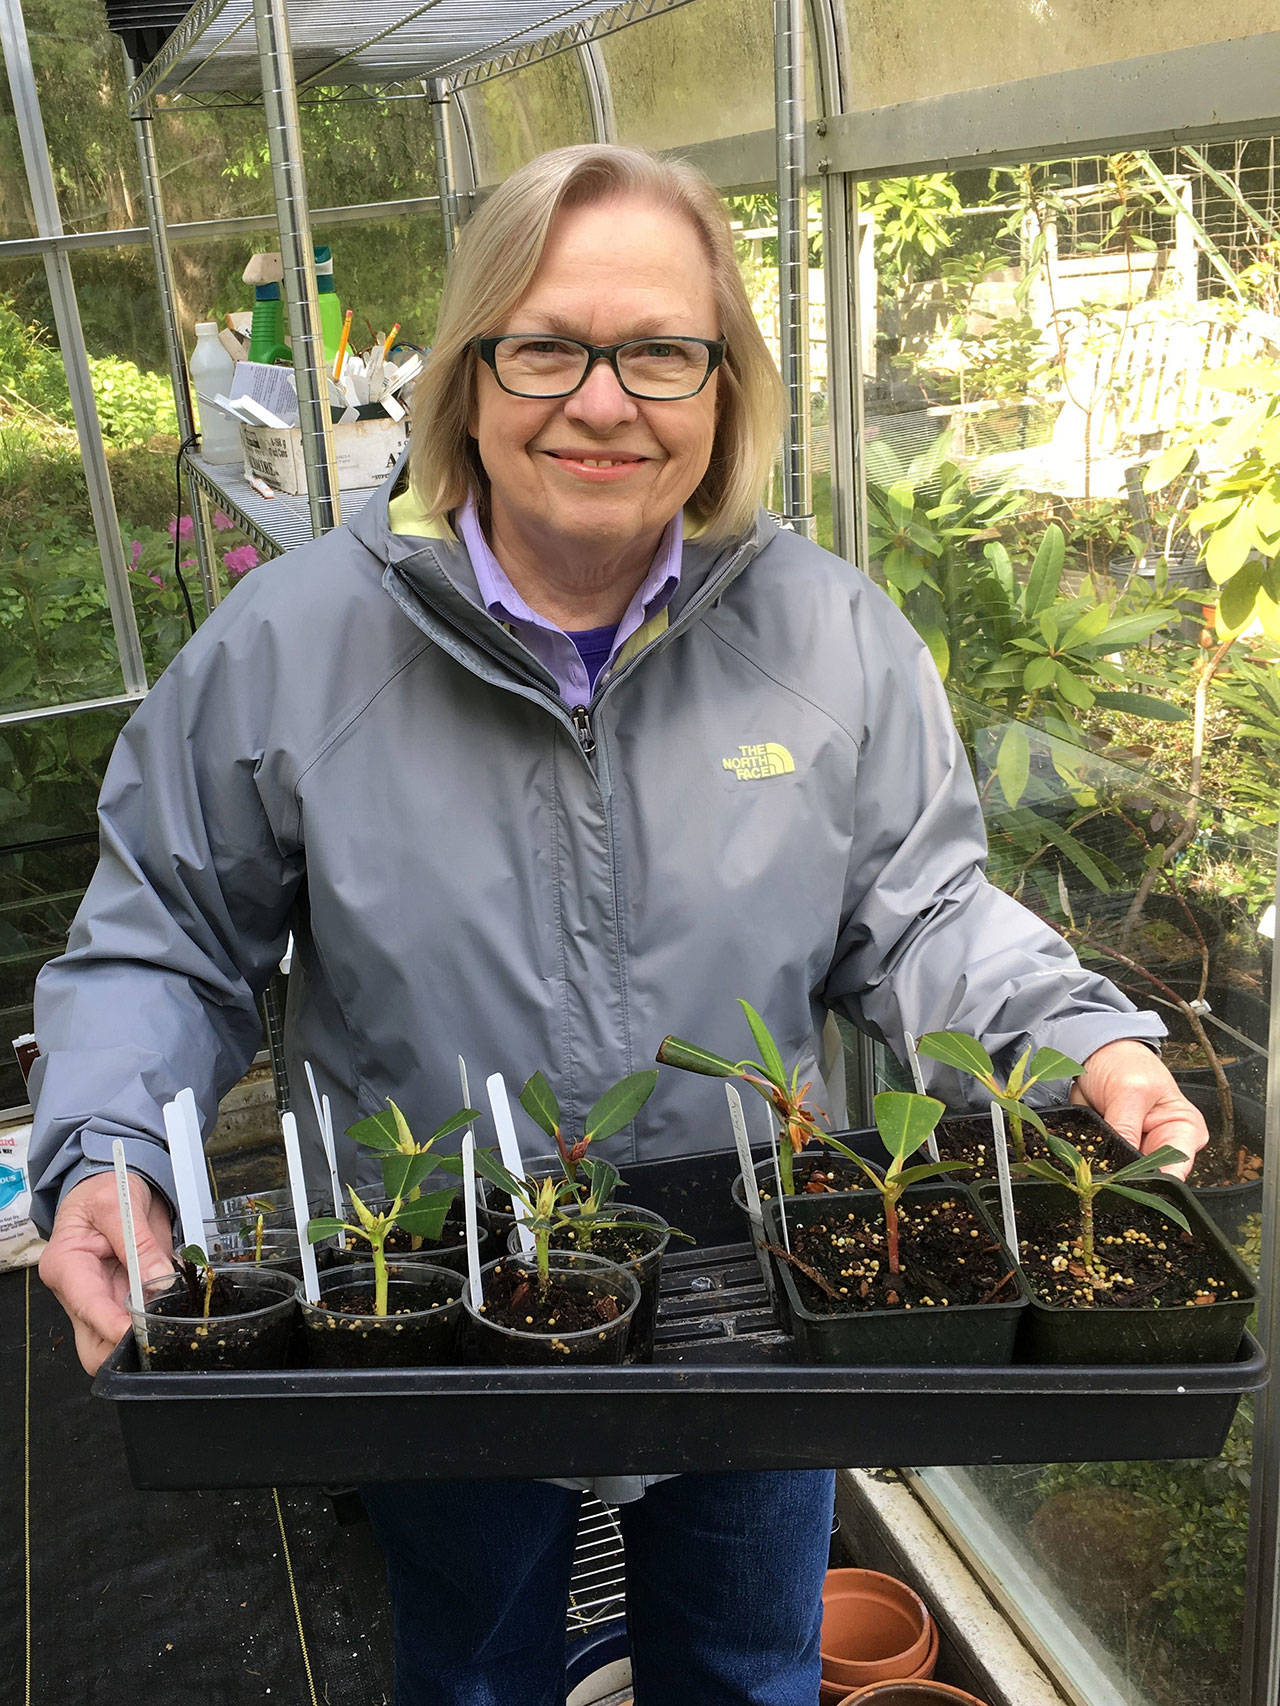 Rosalie Preble, past president of the Juan de Fuca Chapter of the American Rhododendron Society, offers “Propagating Rhododendrons from Cuttings” during her Zoom presentation on Sept. 10. Submitted photo